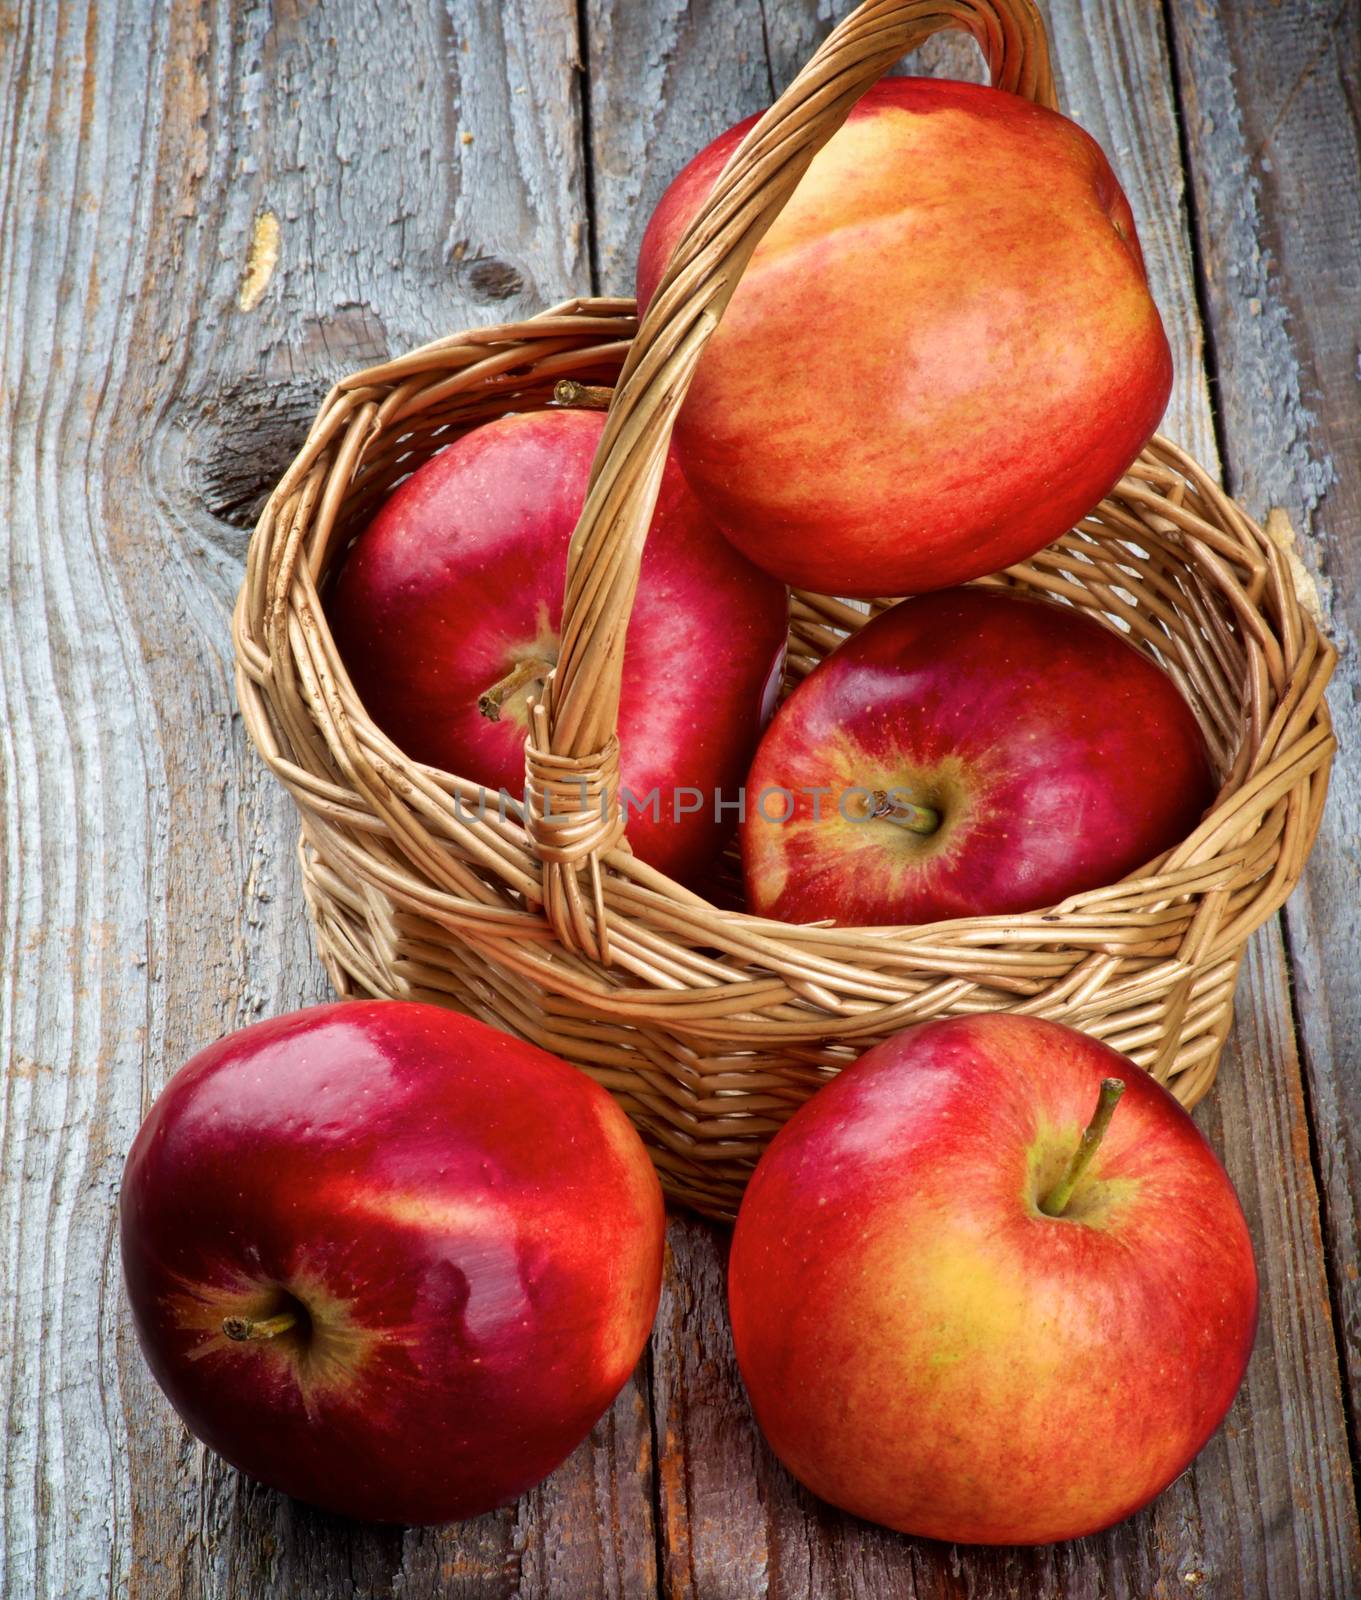 Five Apples Red Delicious in Wicker Basket closeup on Rustic Wooden background